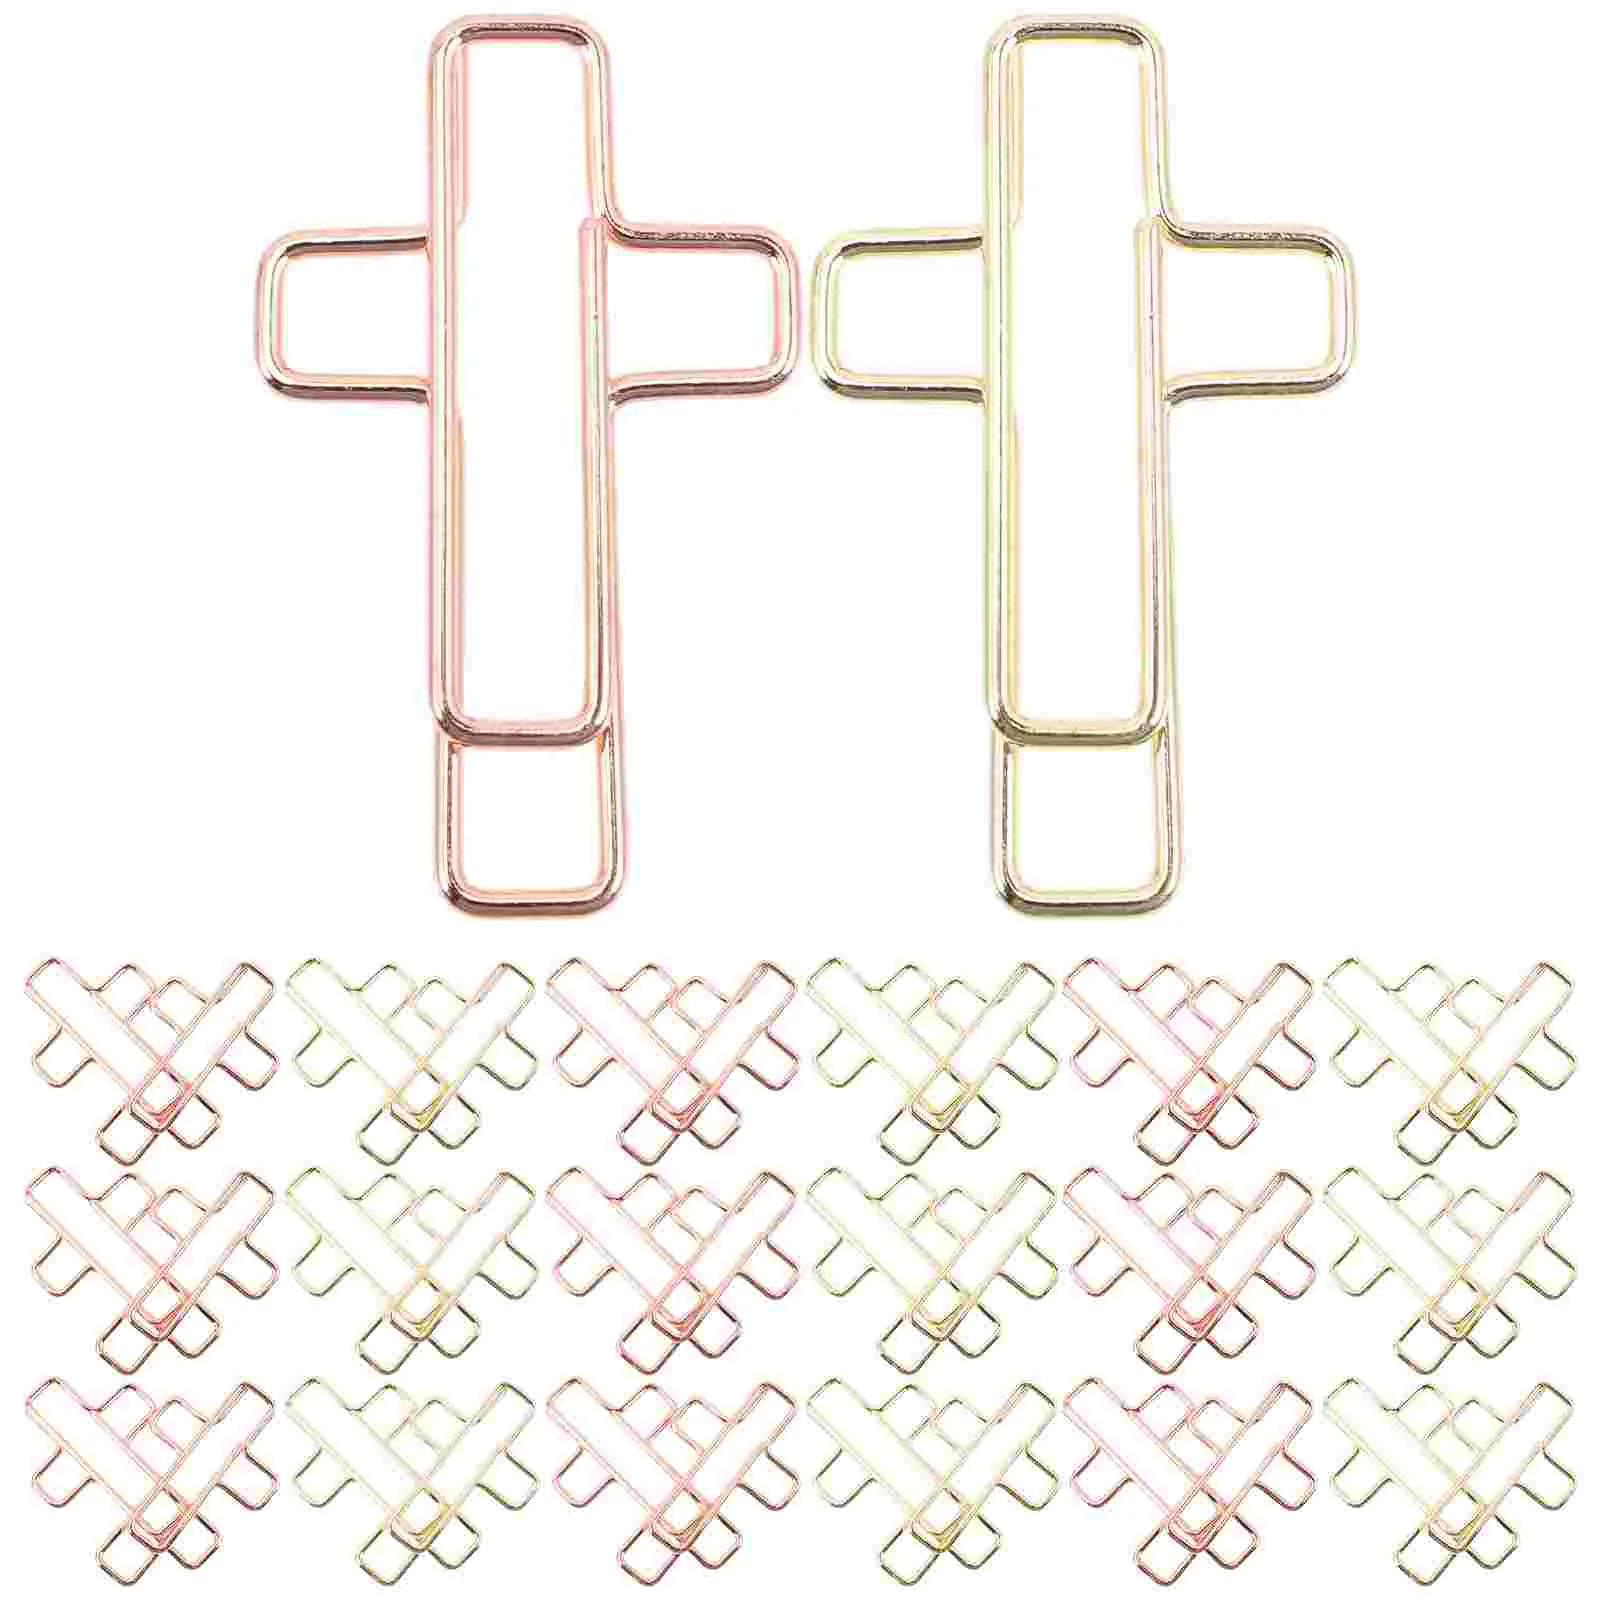 100 Pcs Creative Shaped Paper Clips Small Document Office Supplies Heart Bookmark File Metal Cross Decor Heart-shaped